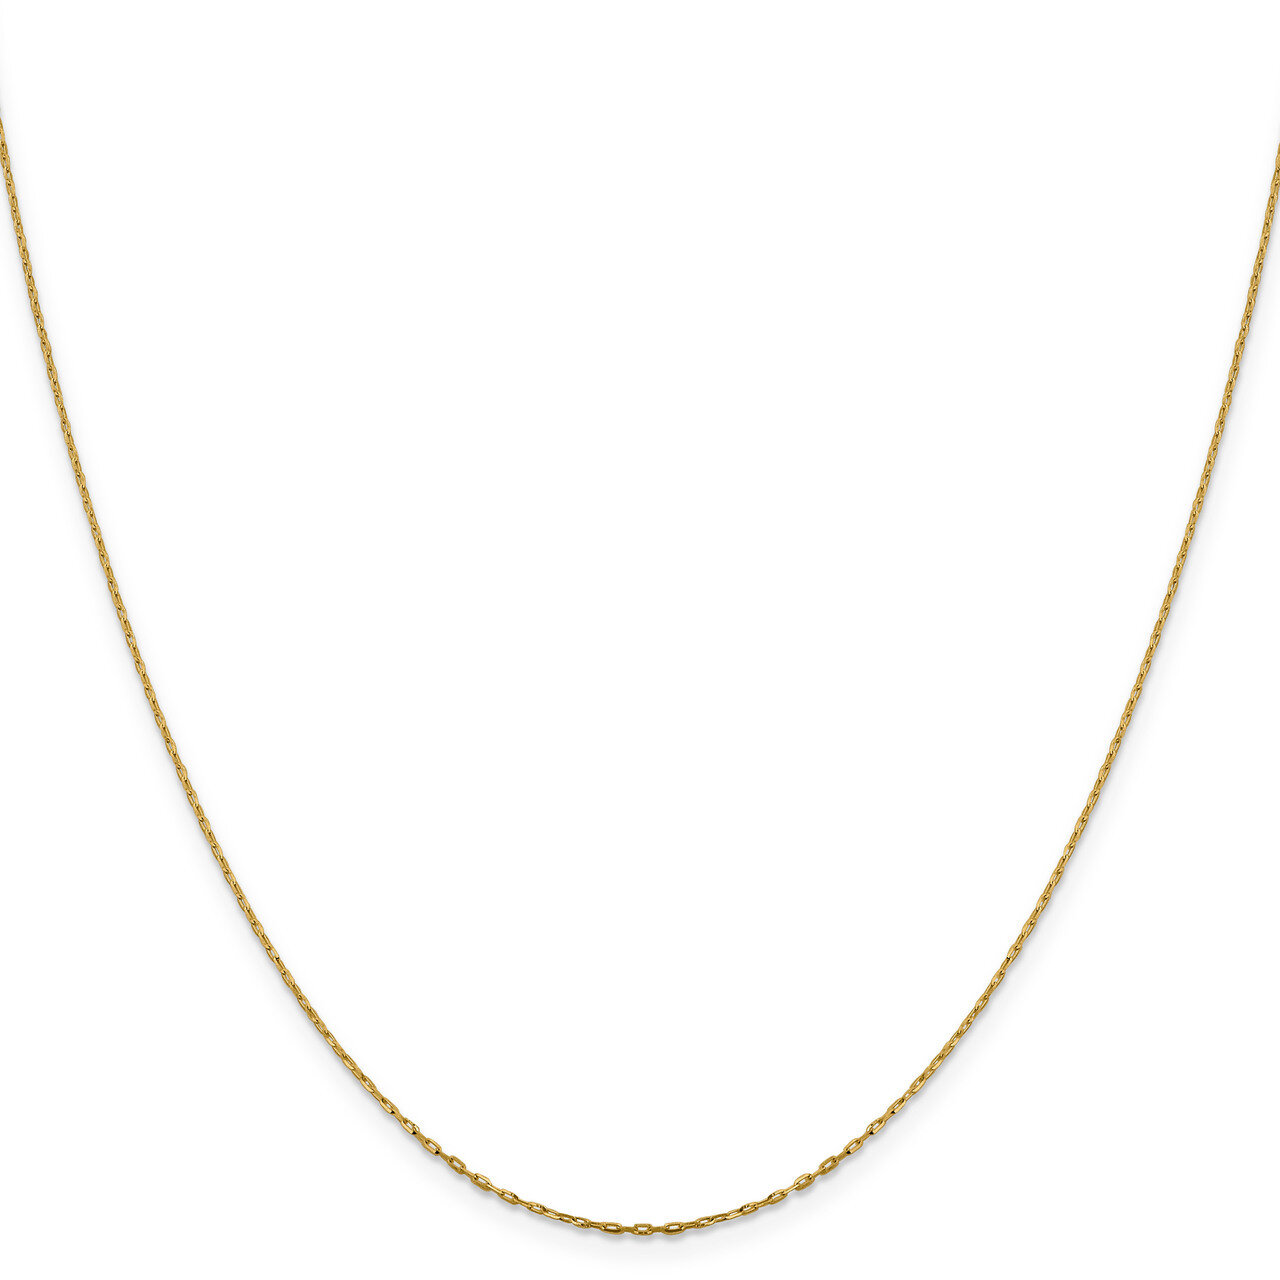 1 mm Diamond-cut Long Open Cable Link Chain 18 Inch 14k Gold HB-7194-18